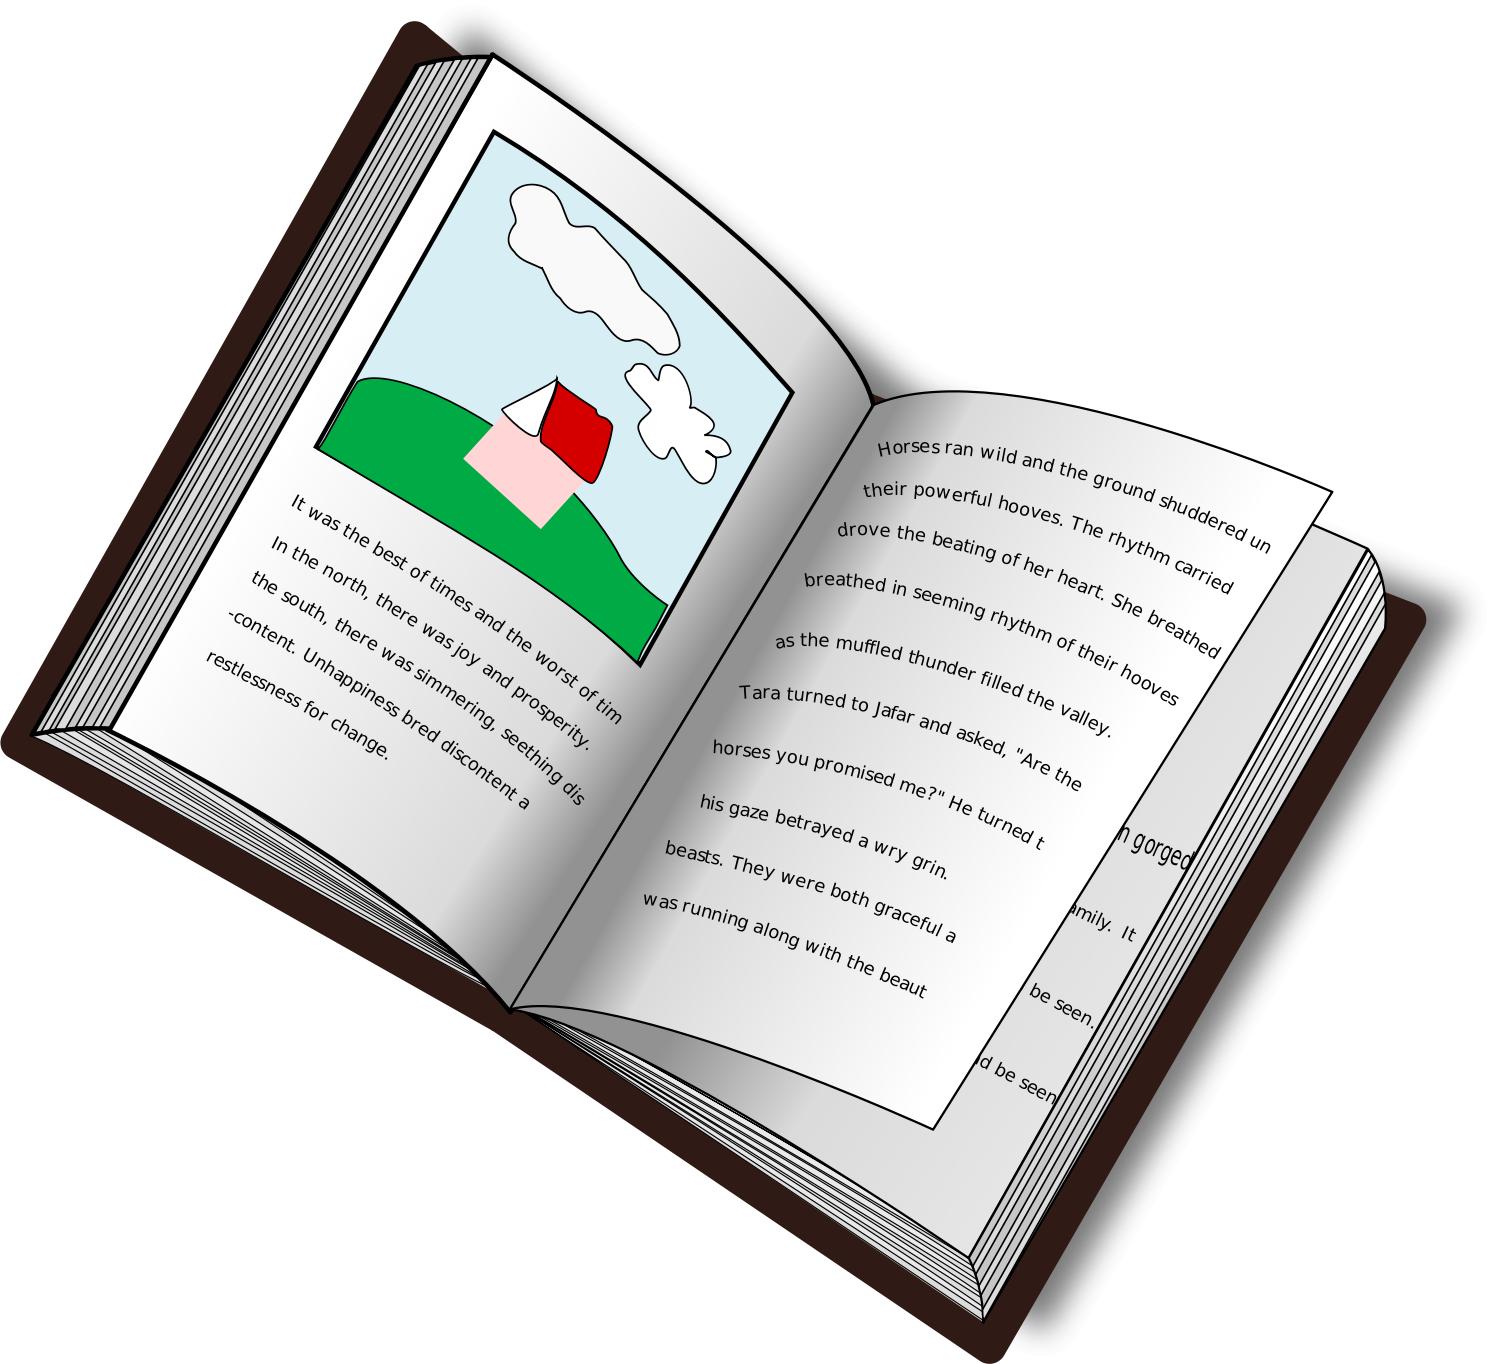 book with picture and text png